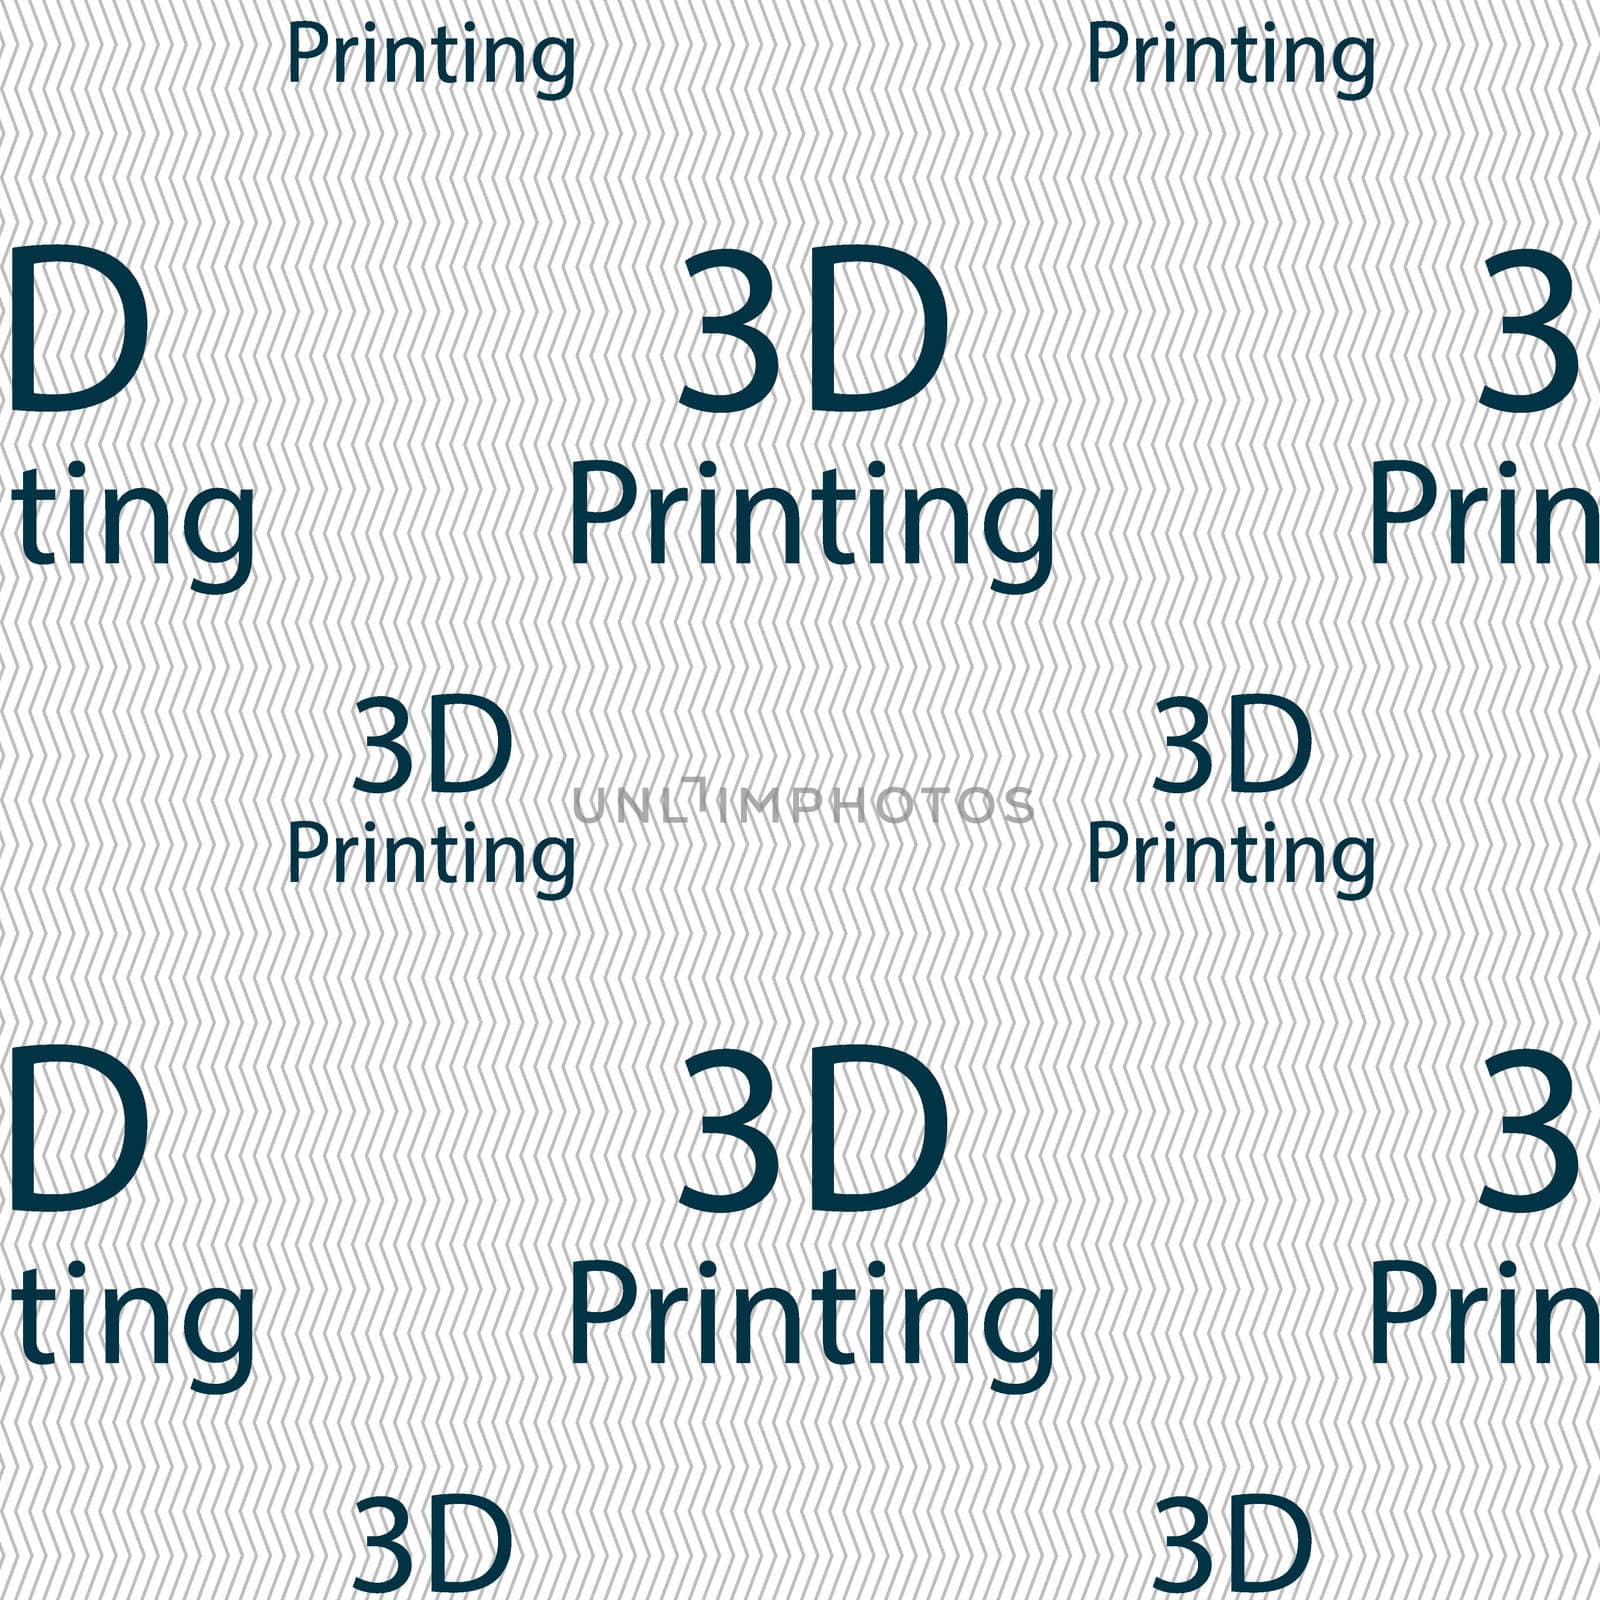 3D Print sign icon. 3d-Printing symbol. Seamless pattern with geometric texture. illustration